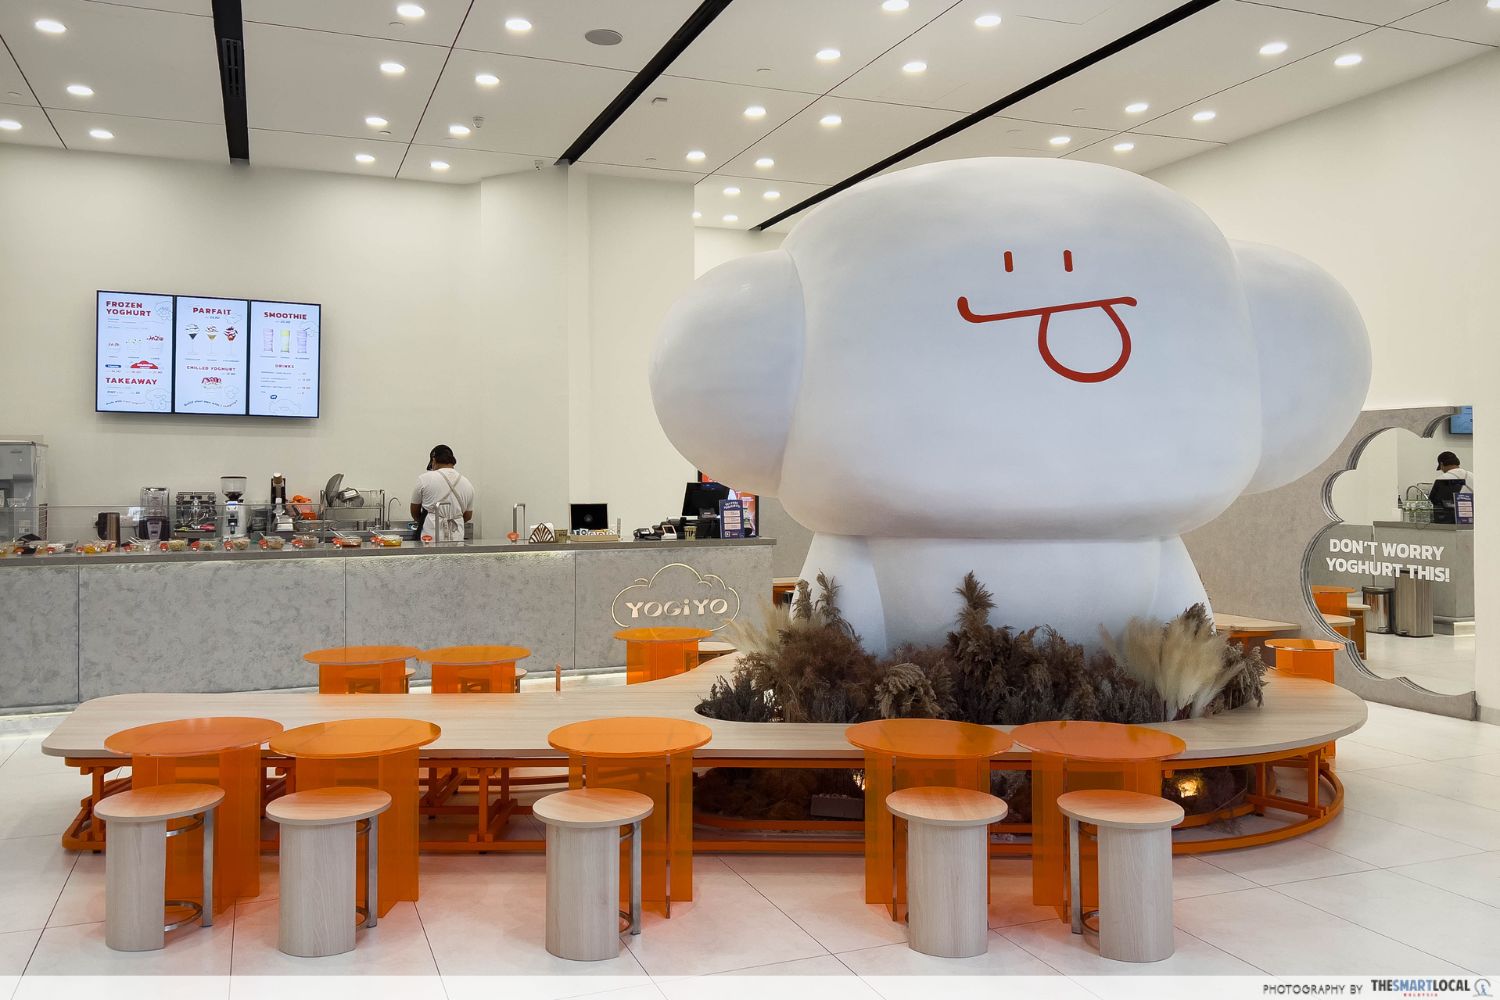 yogiyo interior with a blob-like white mascot, its tongue is sticking out mischievously